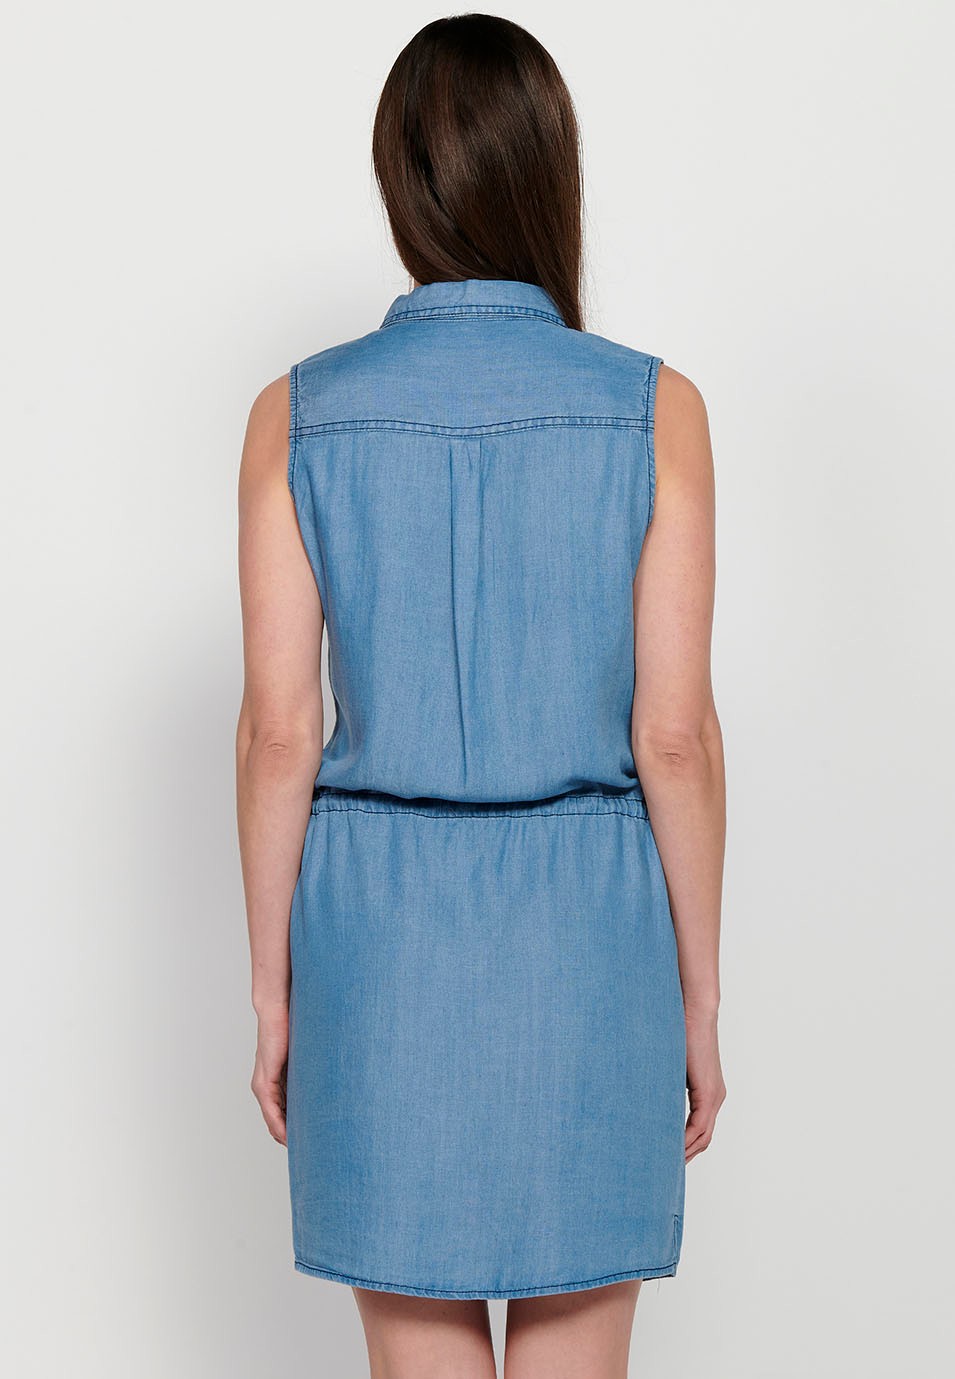 Sleeveless midi dress with front closure with buttons and embroidered details, tight at the waist in Blue for Women 2